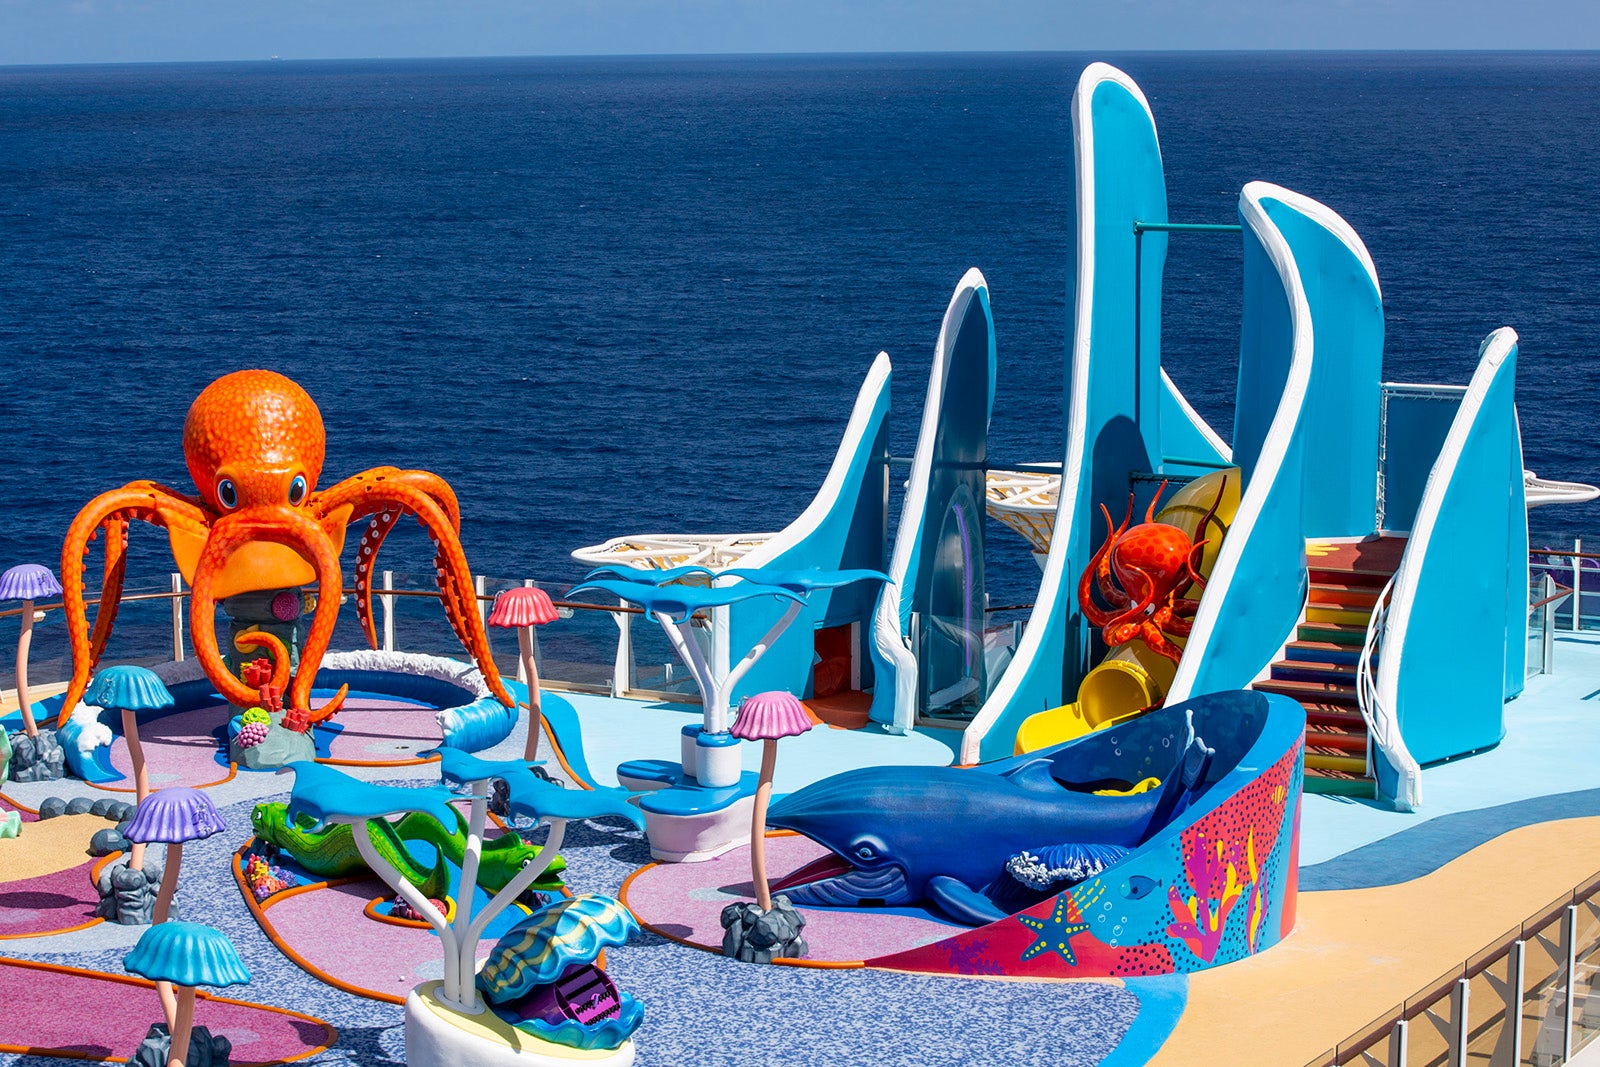 Ocean-themed mini-golf and playground on cruise ship at sea